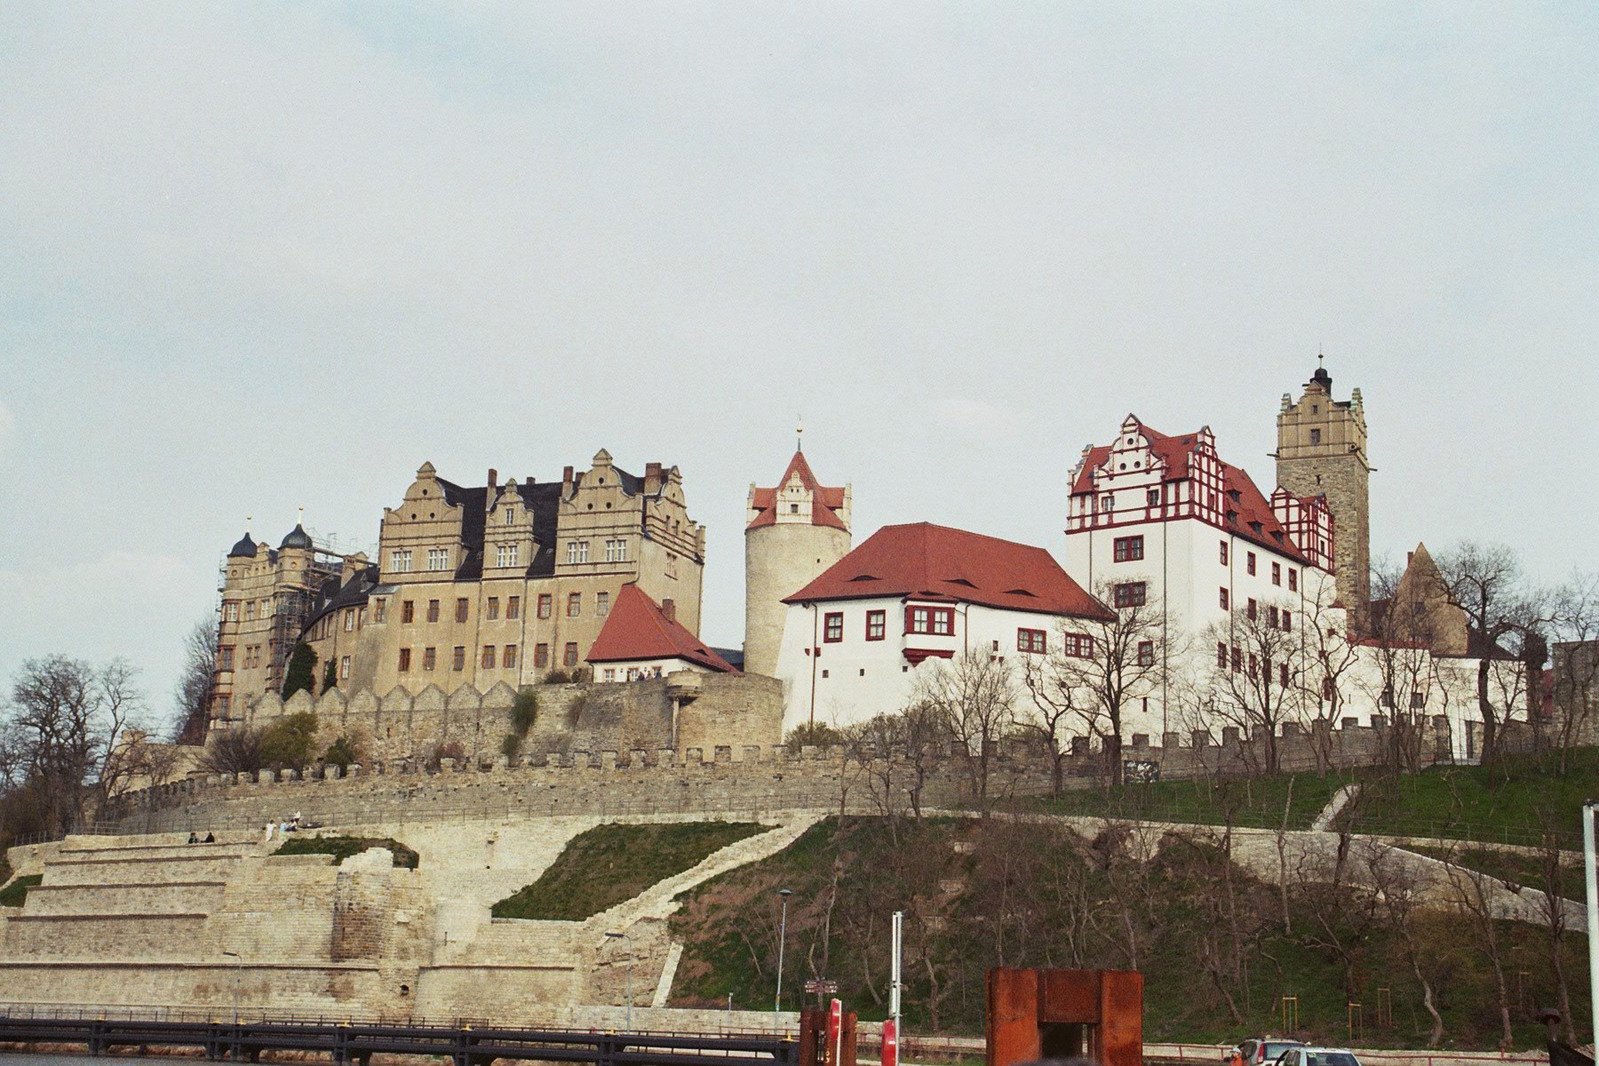 the castle on the hill is surrounded by many people